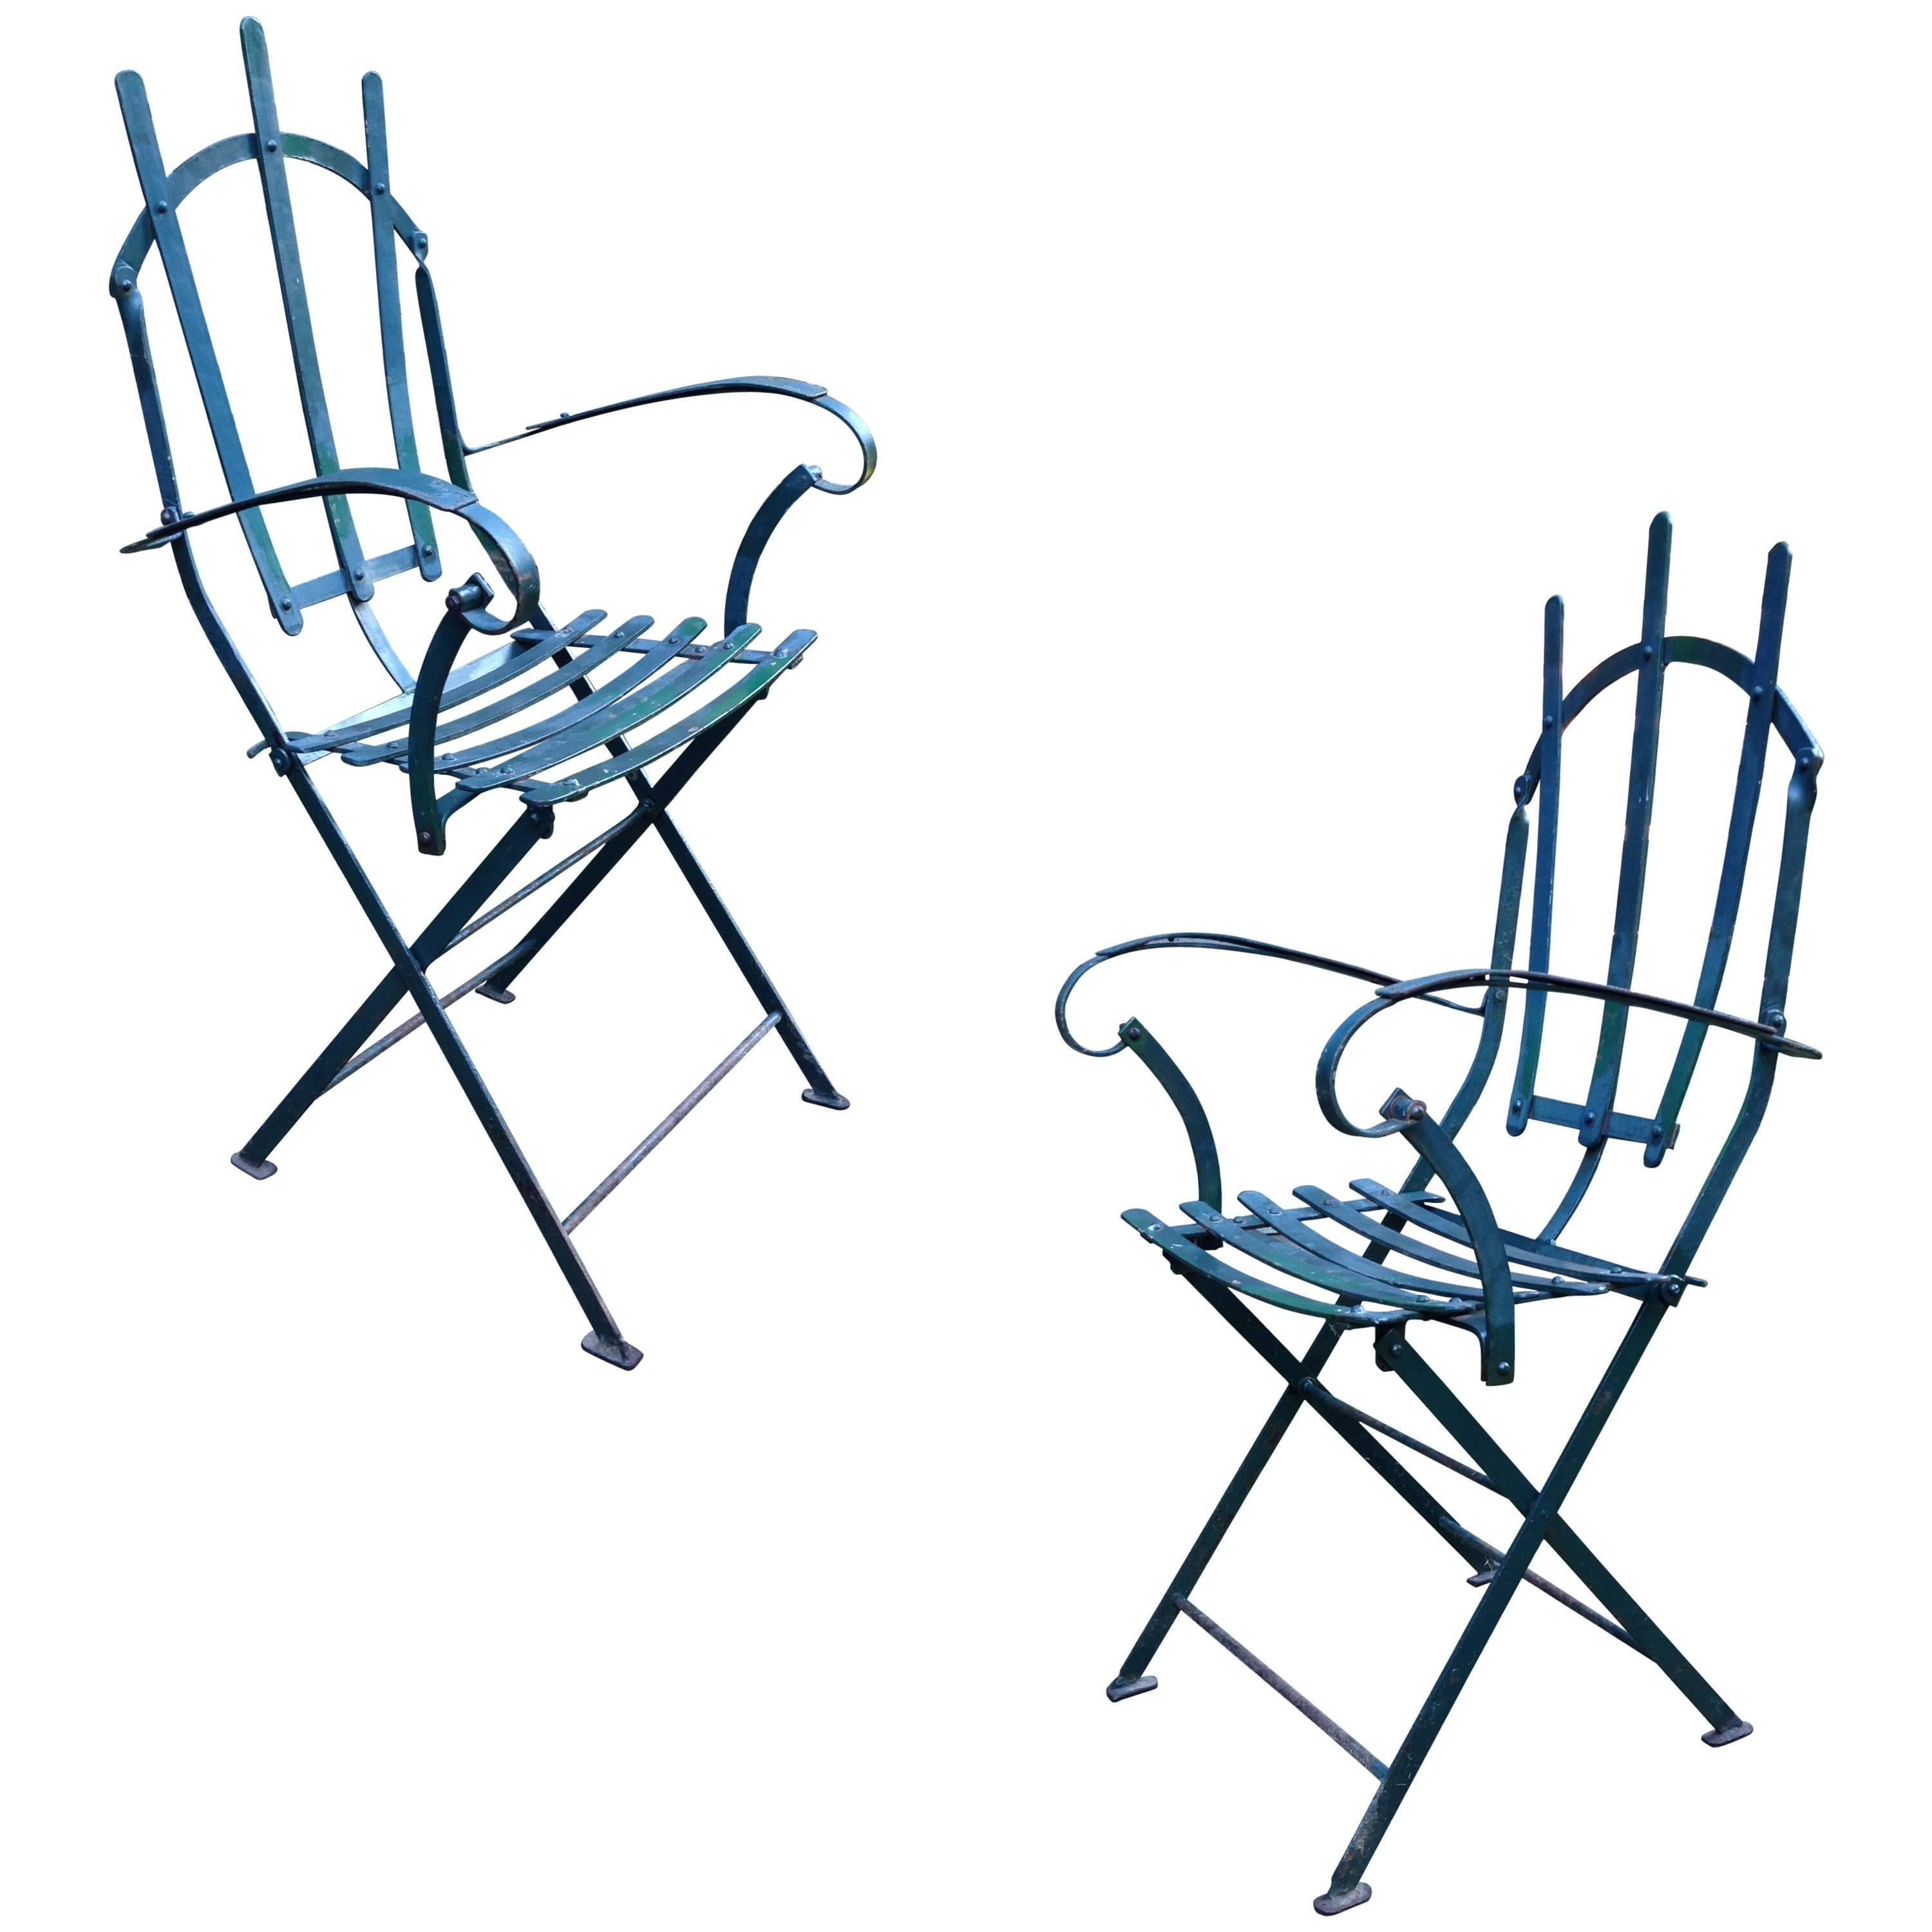 Rare Set of Four Steel Garden Chairs, Early 20th Century For Sale